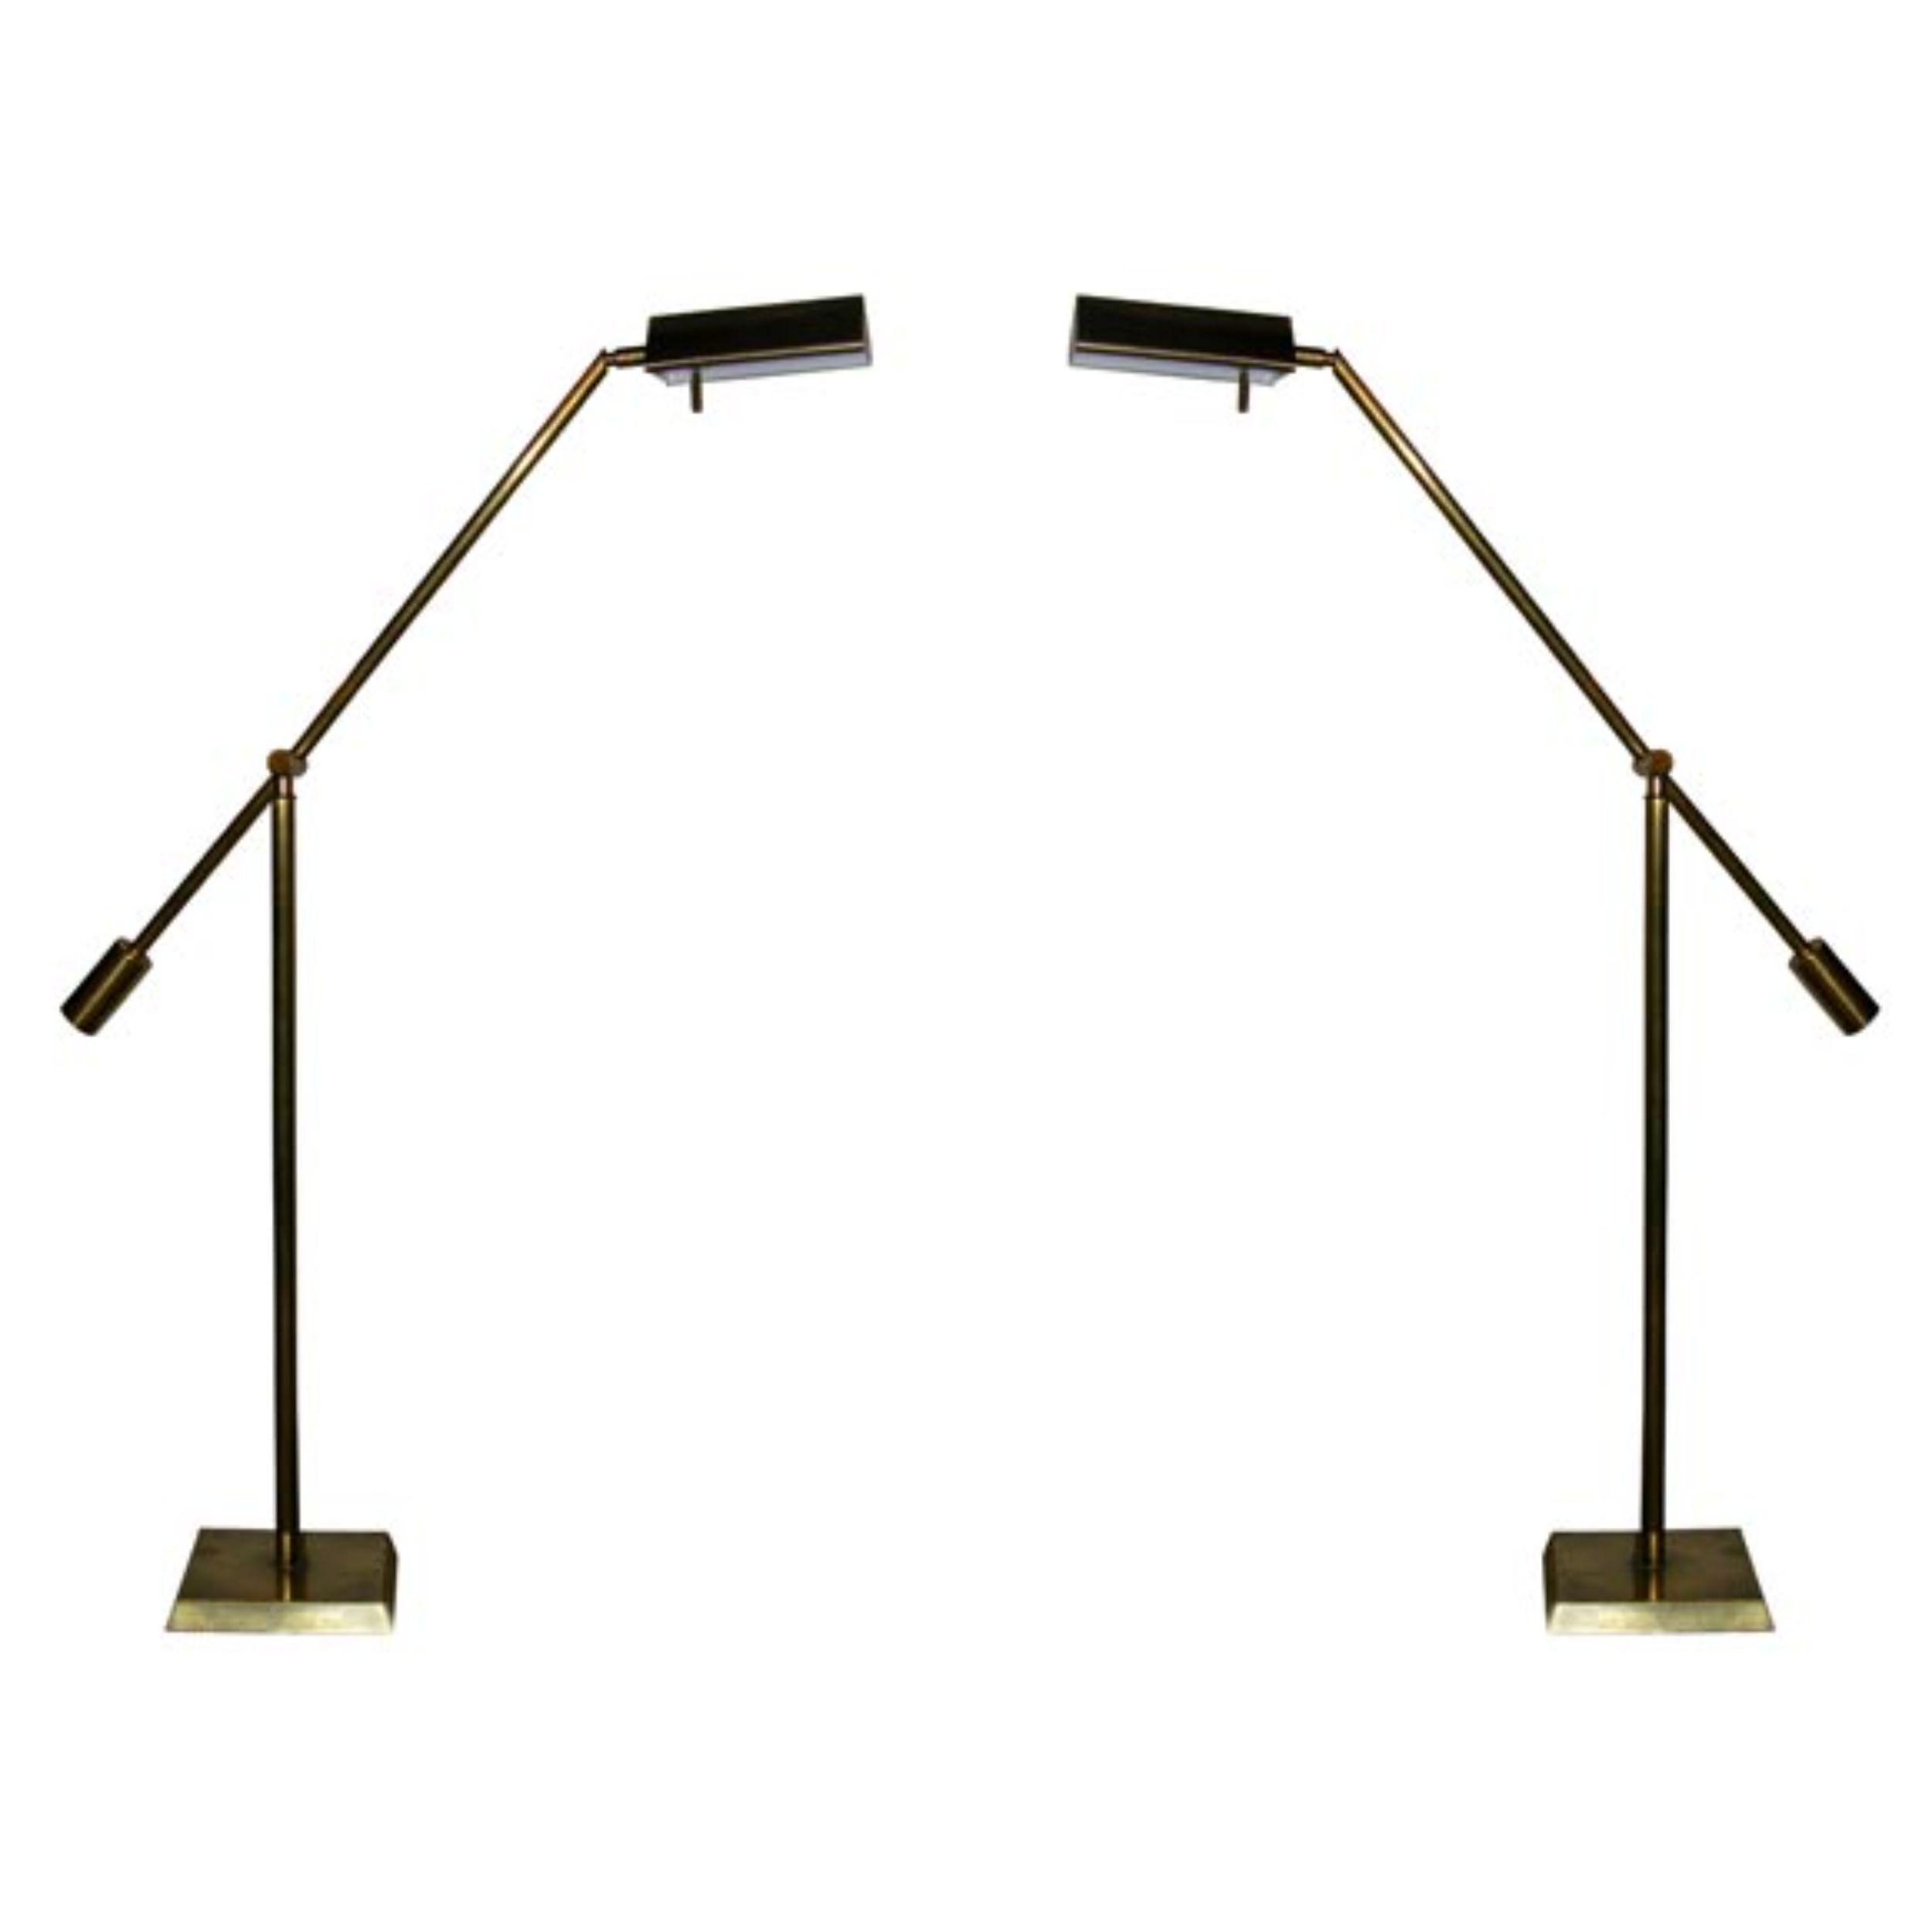 Pair of Adjustable Counter Balance Brass Floor Lamps by Chapman